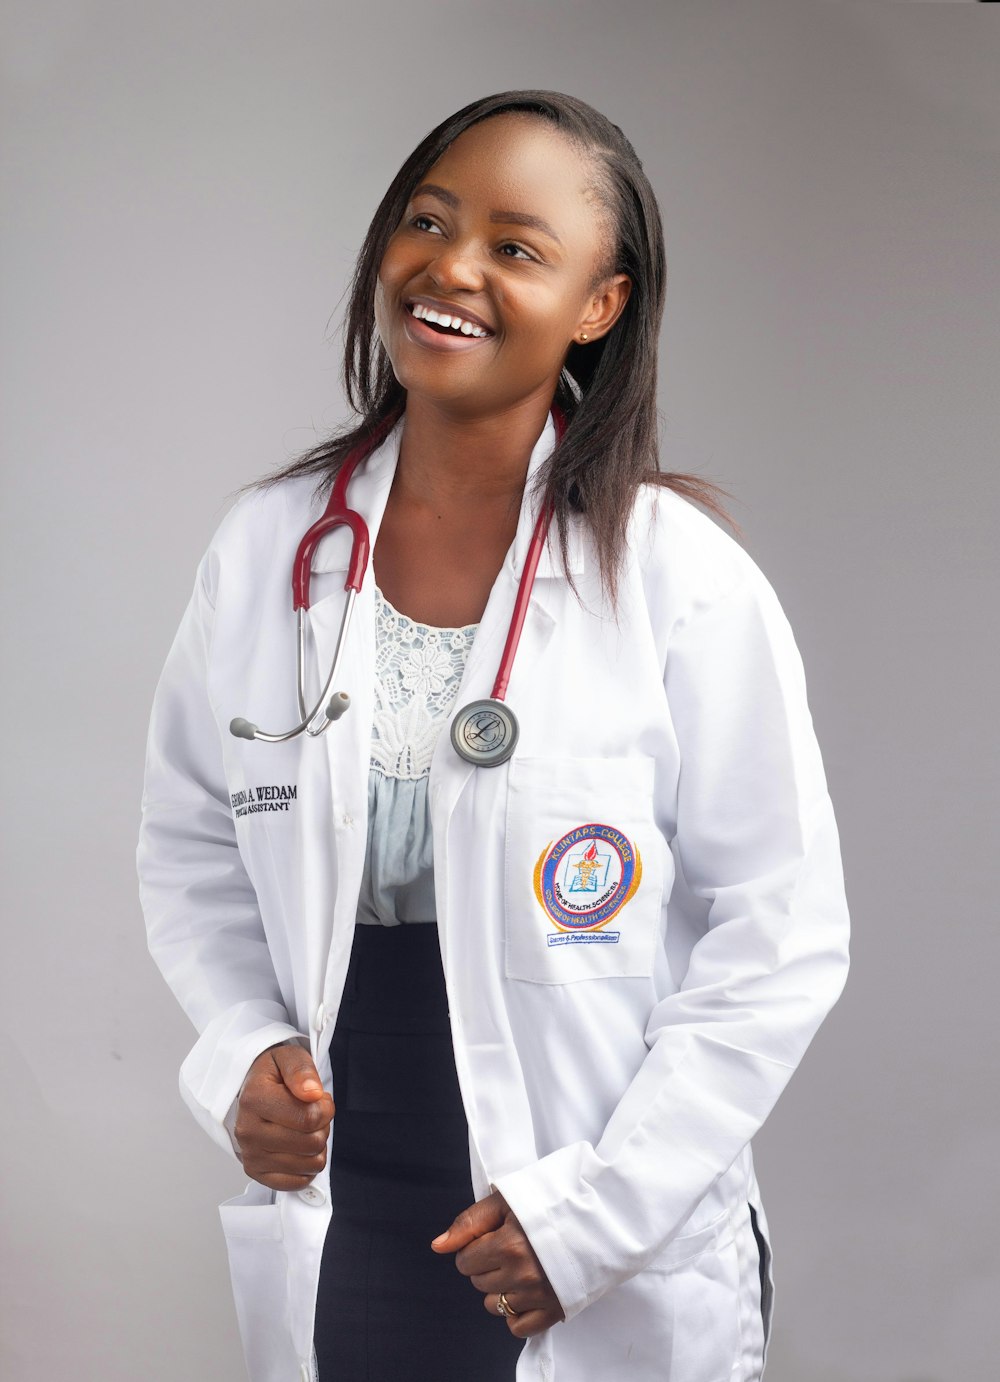 a woman wearing a white coat and a stethoscope